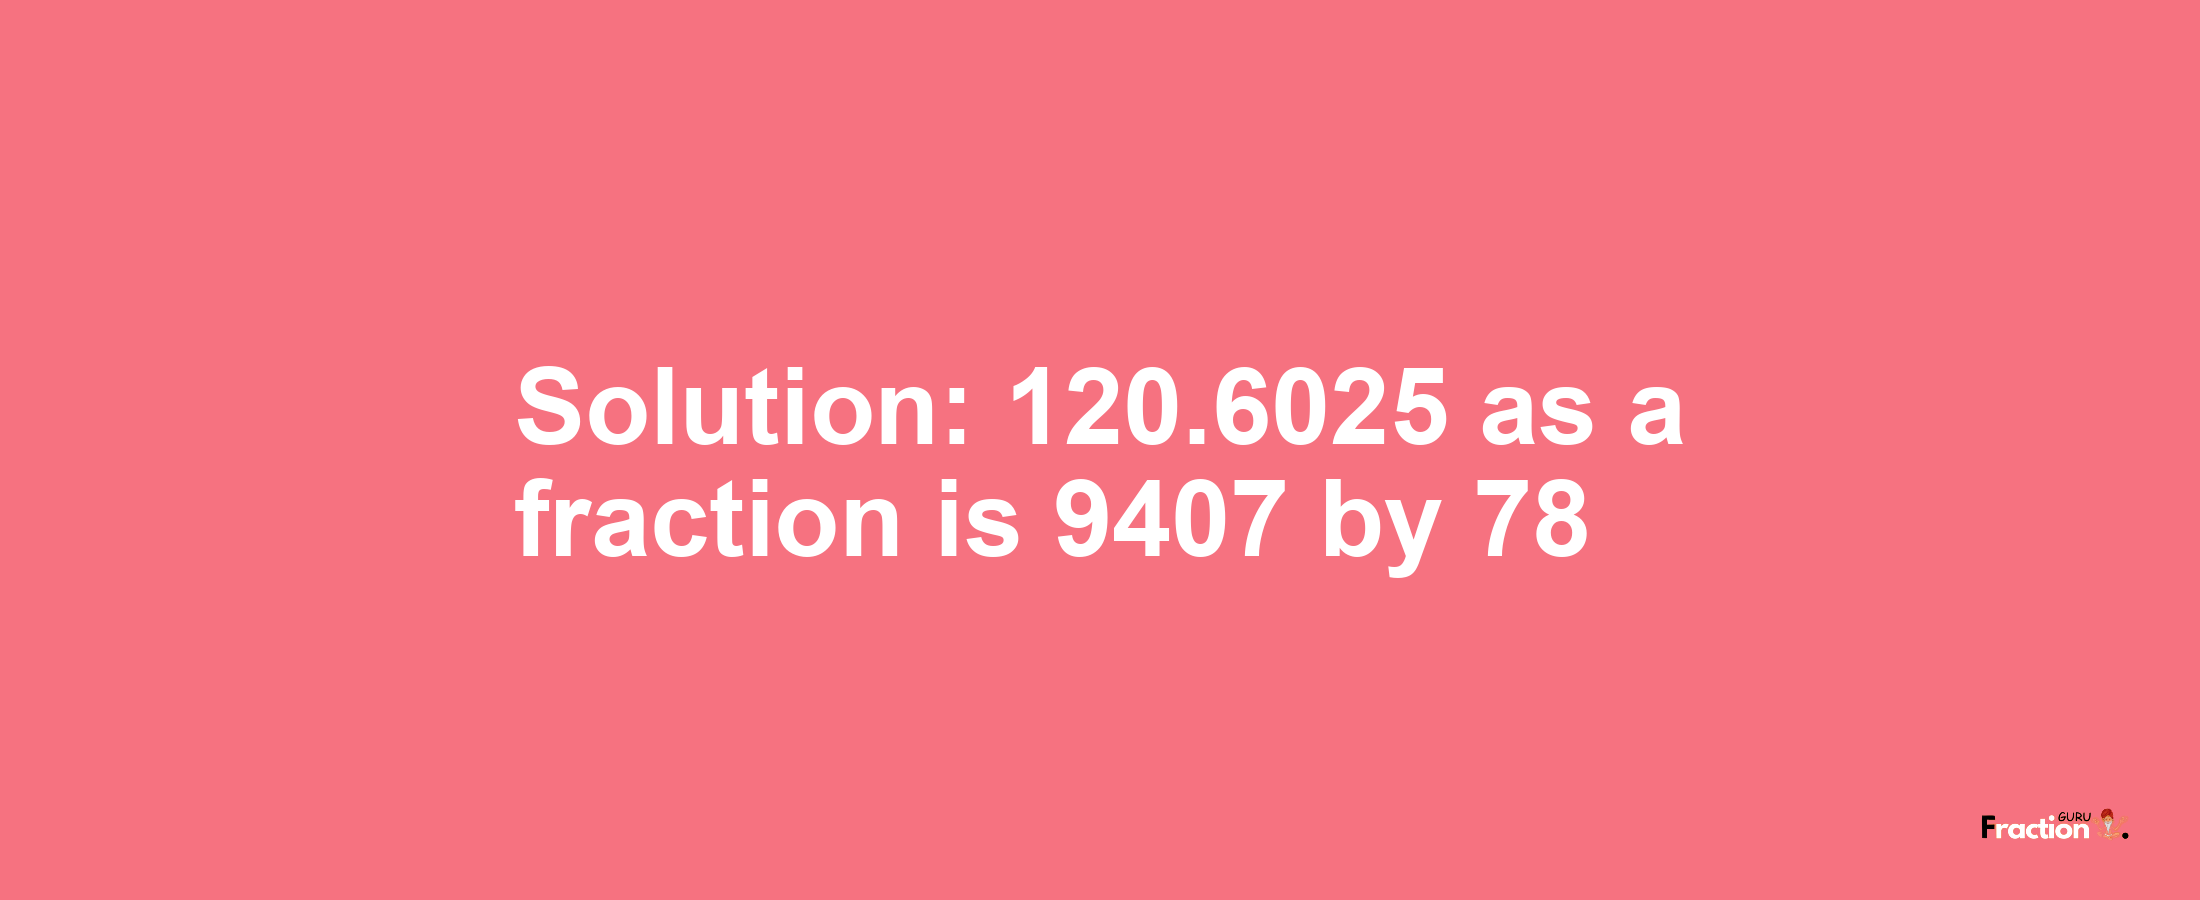 Solution:120.6025 as a fraction is 9407/78